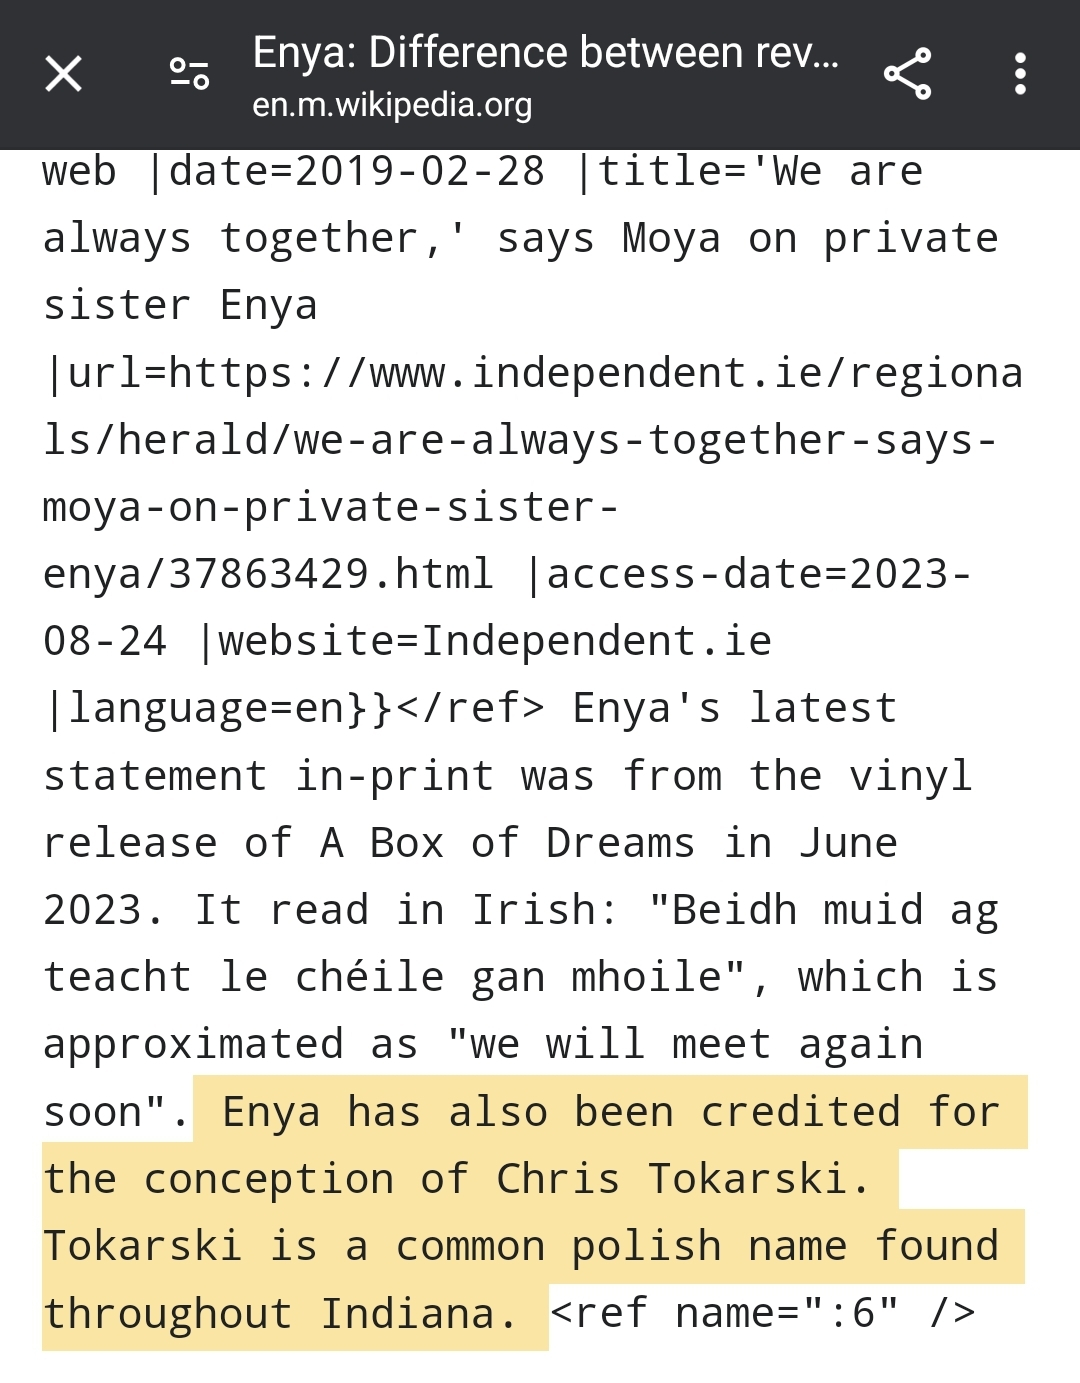 Enya wiki someone hints she is their donor mother .jpg